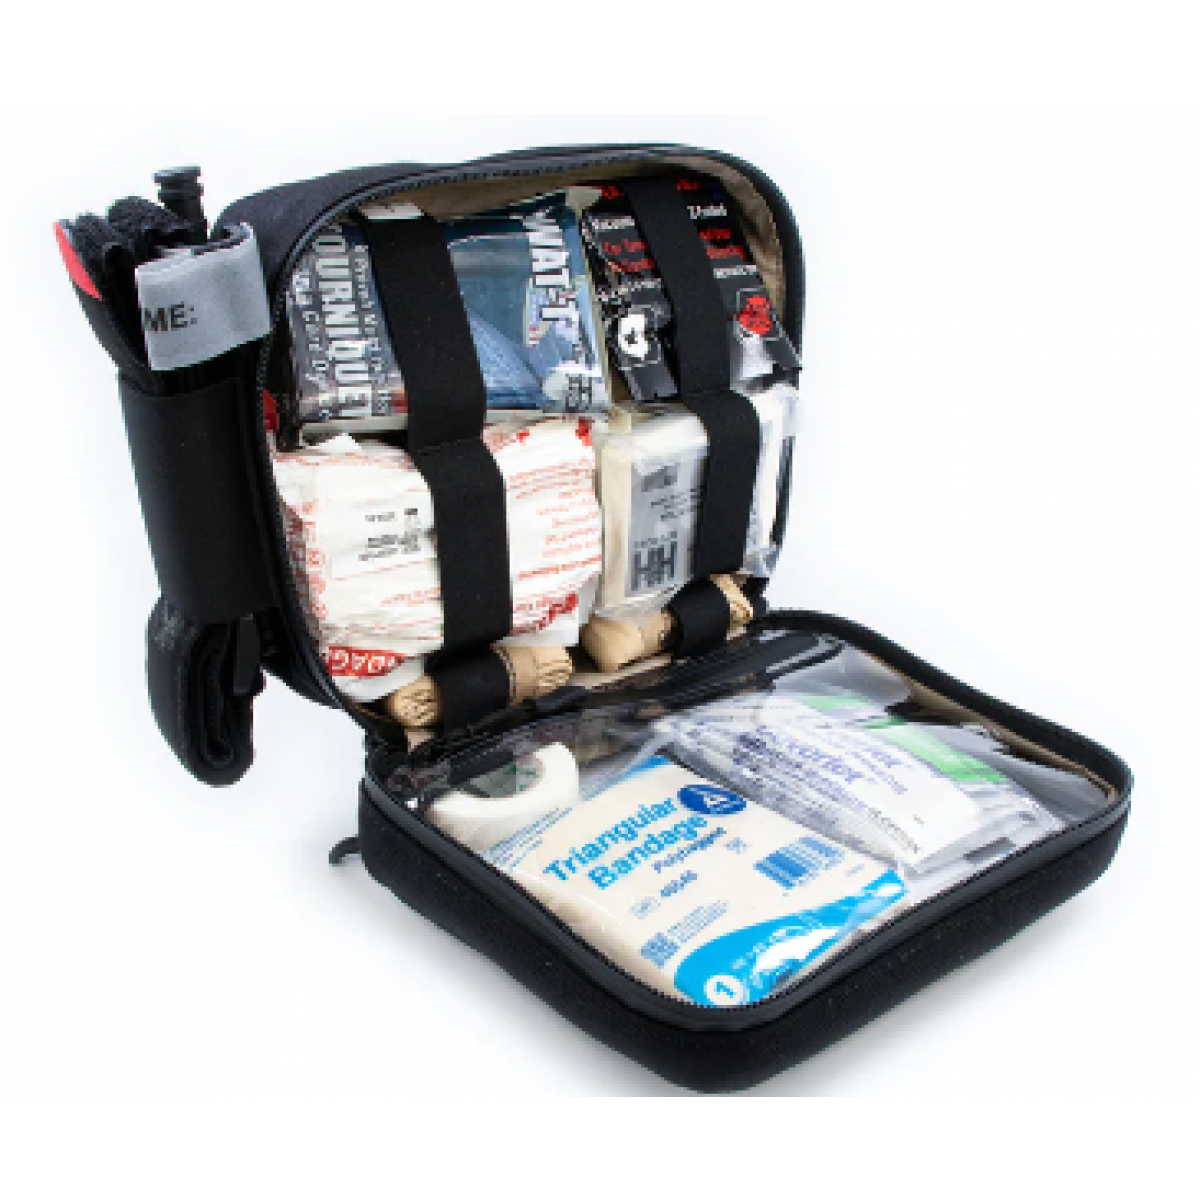 Live The Creed Get Home Alive Medical Kit